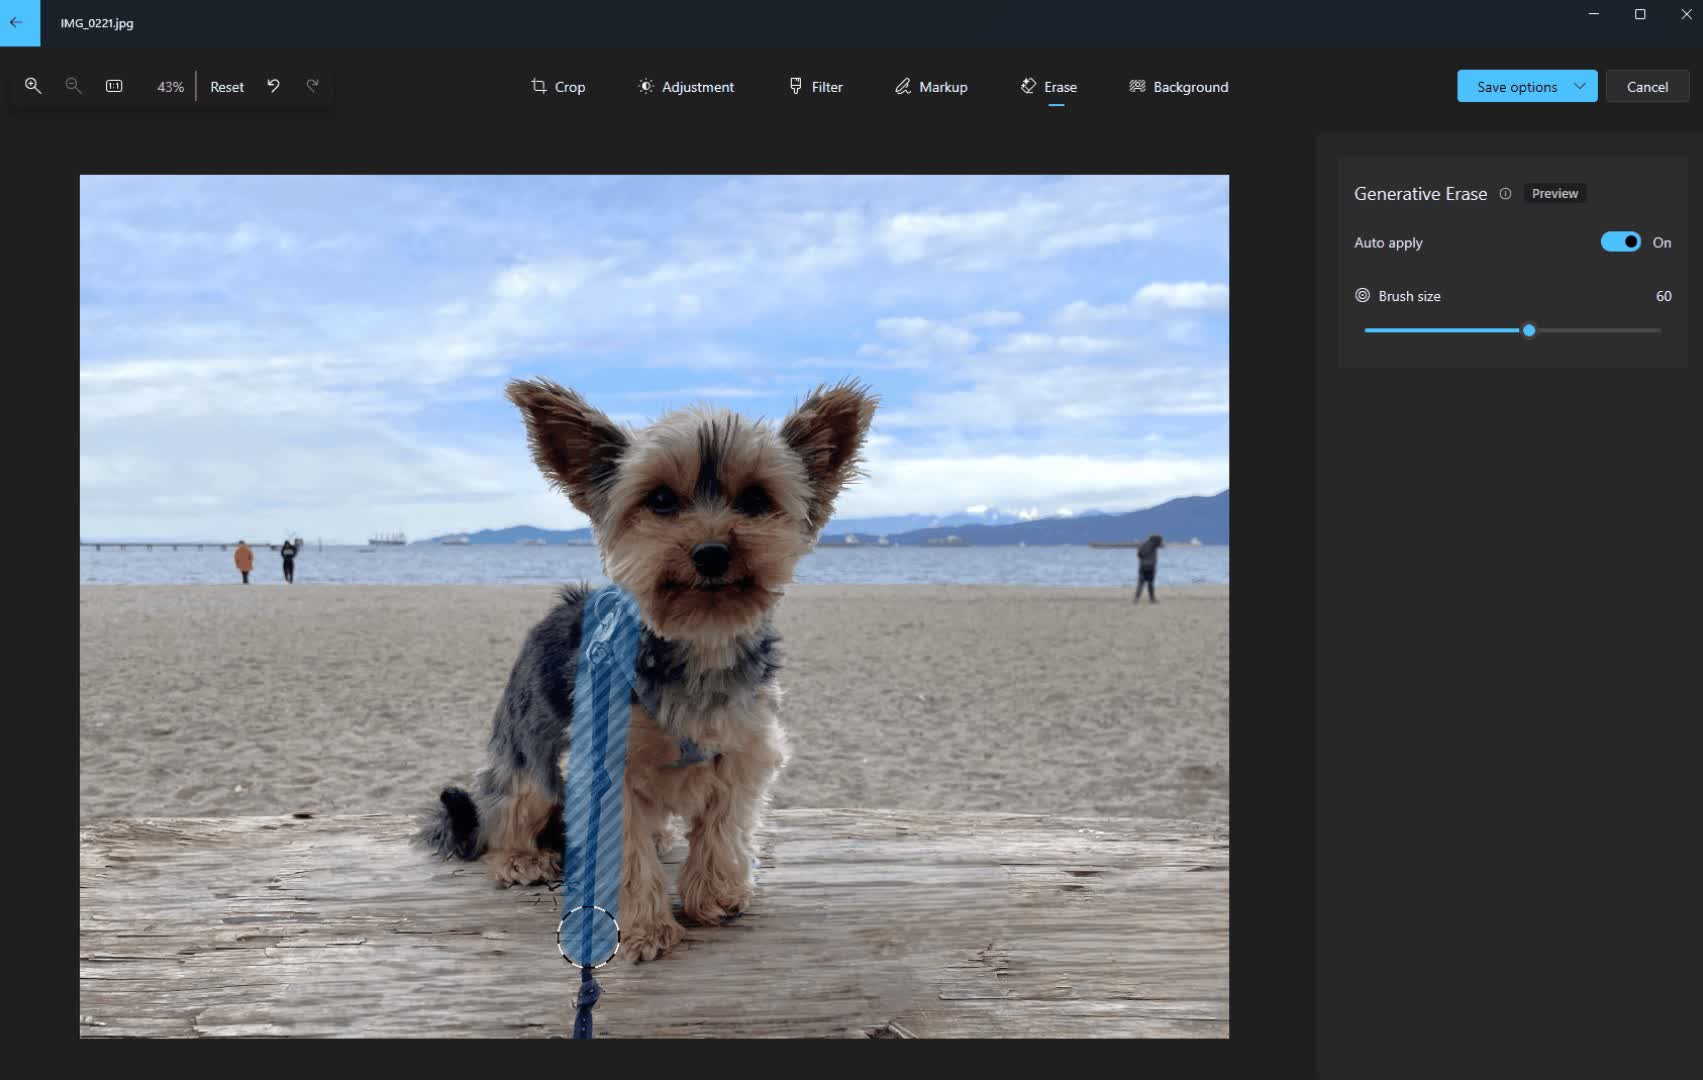 The Home windows Photos app will get fresh AI object elimination characteristic